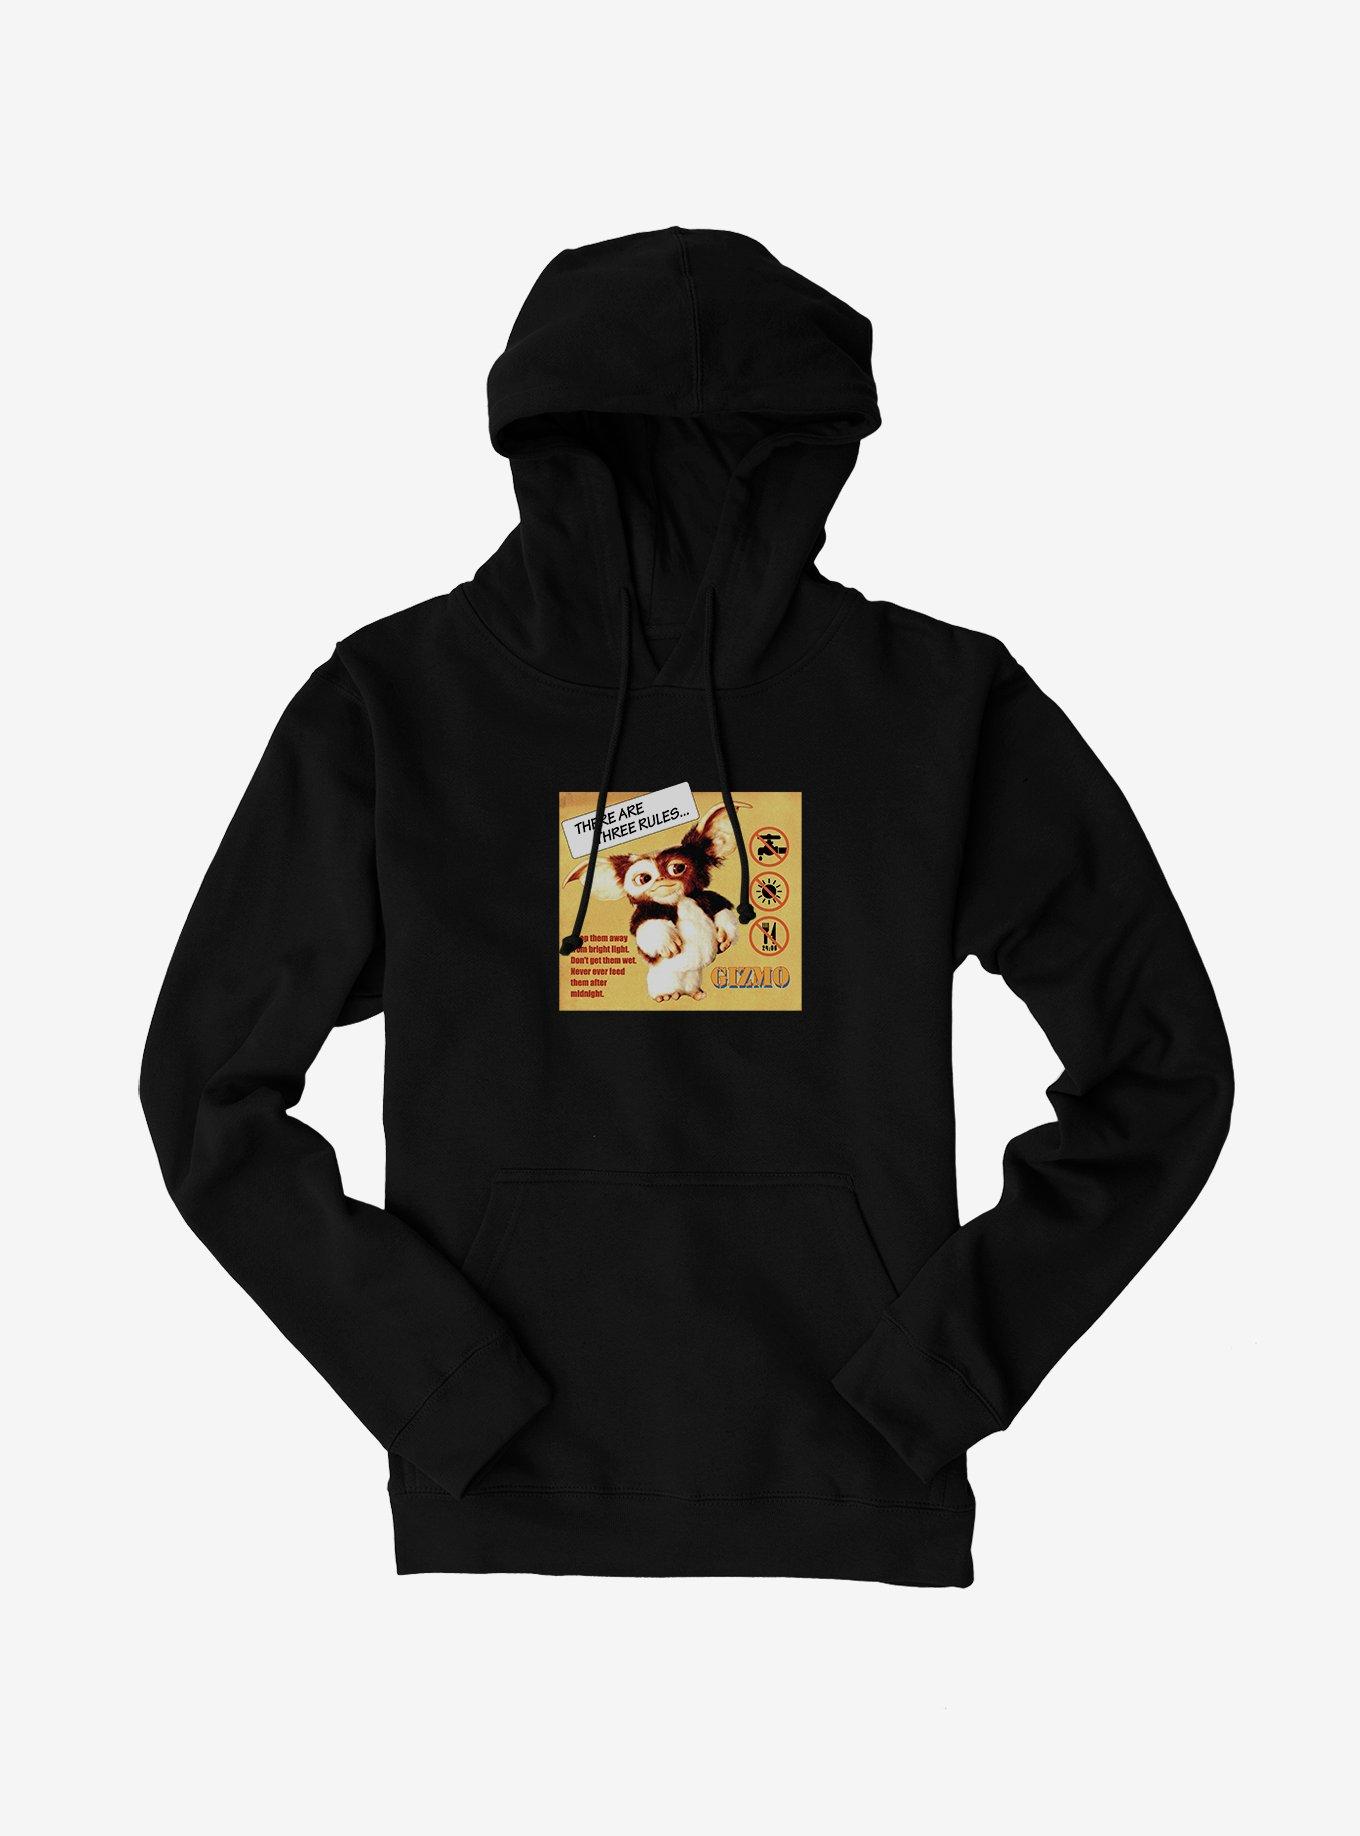 Gremlins There Are Three Rules... Hoodie